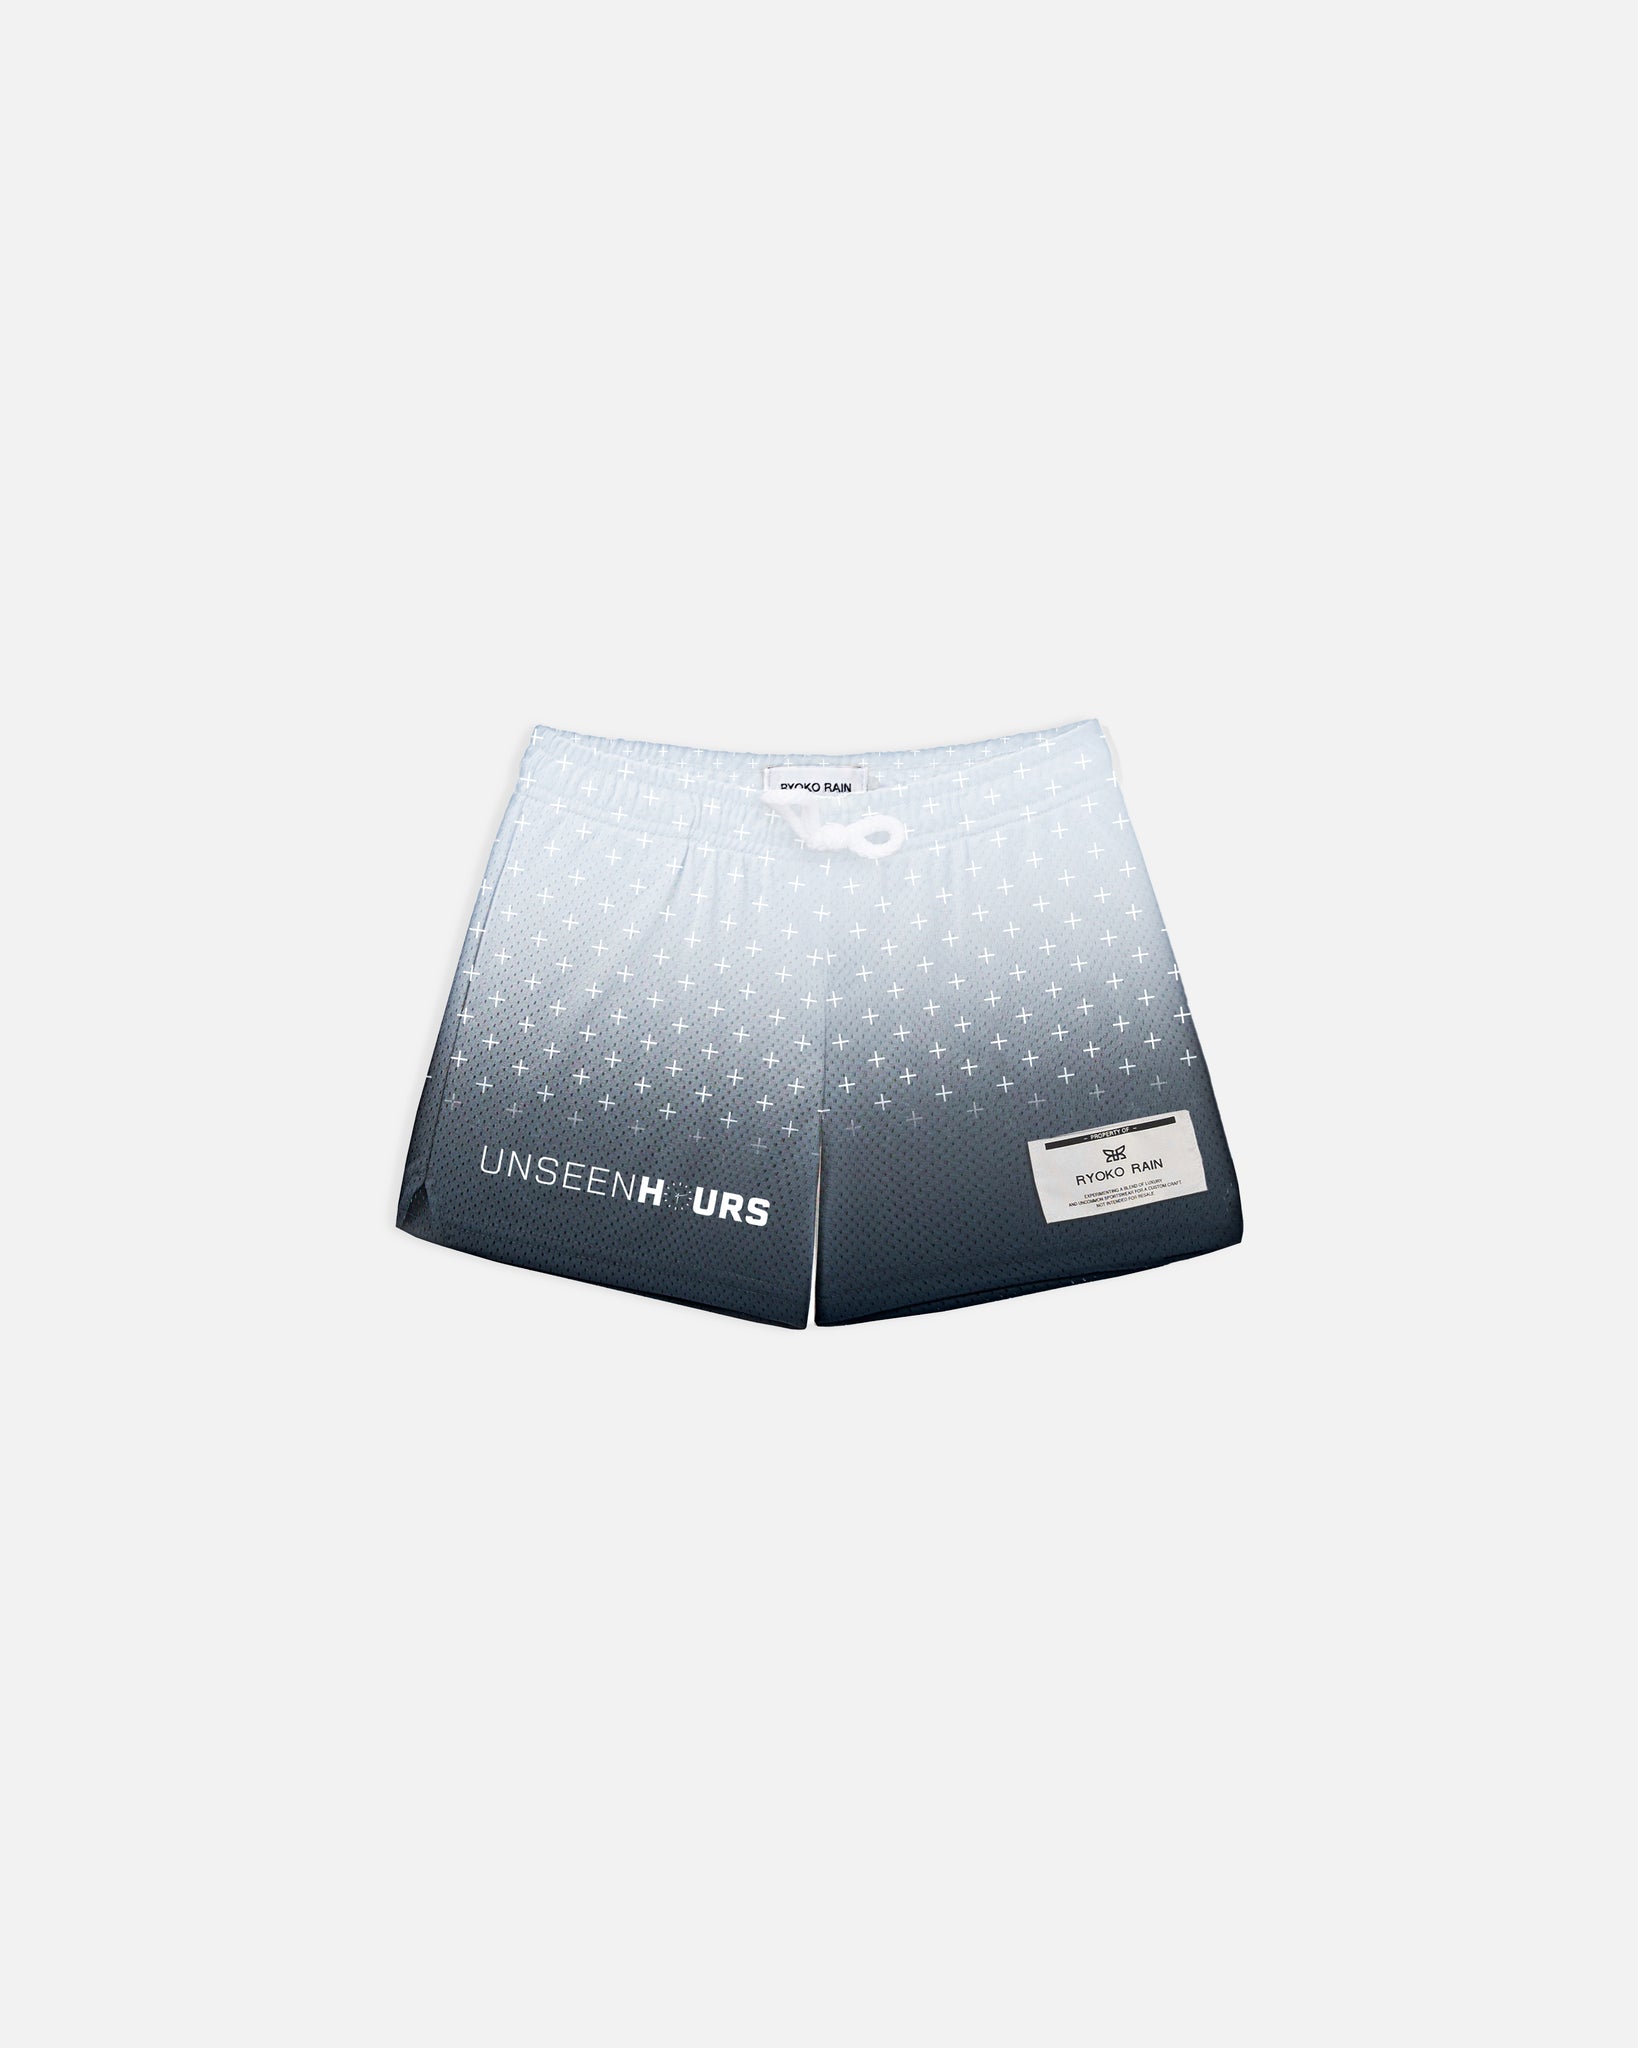 UNSEEN HOURS SHORTS (YOUTH)- COOL GREY